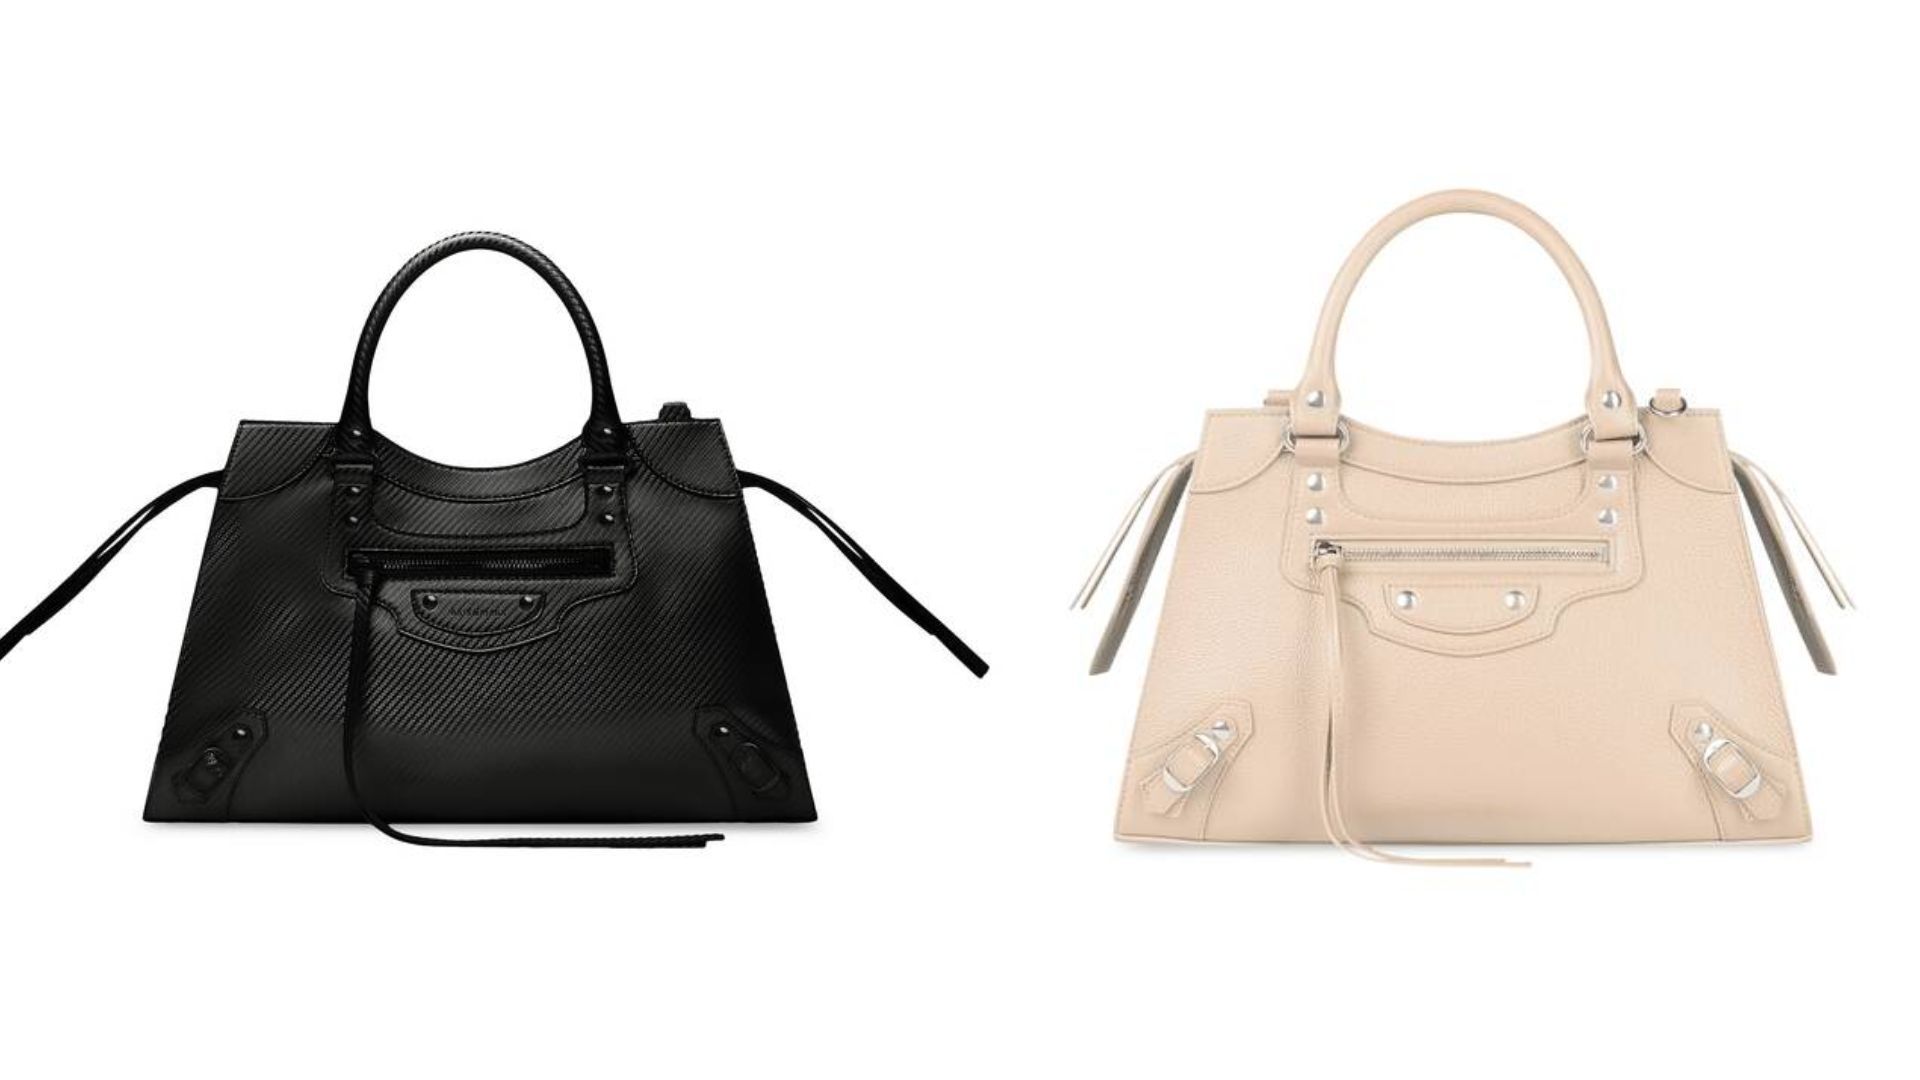 Can an iconic bag inspire an iconic jewellery line?